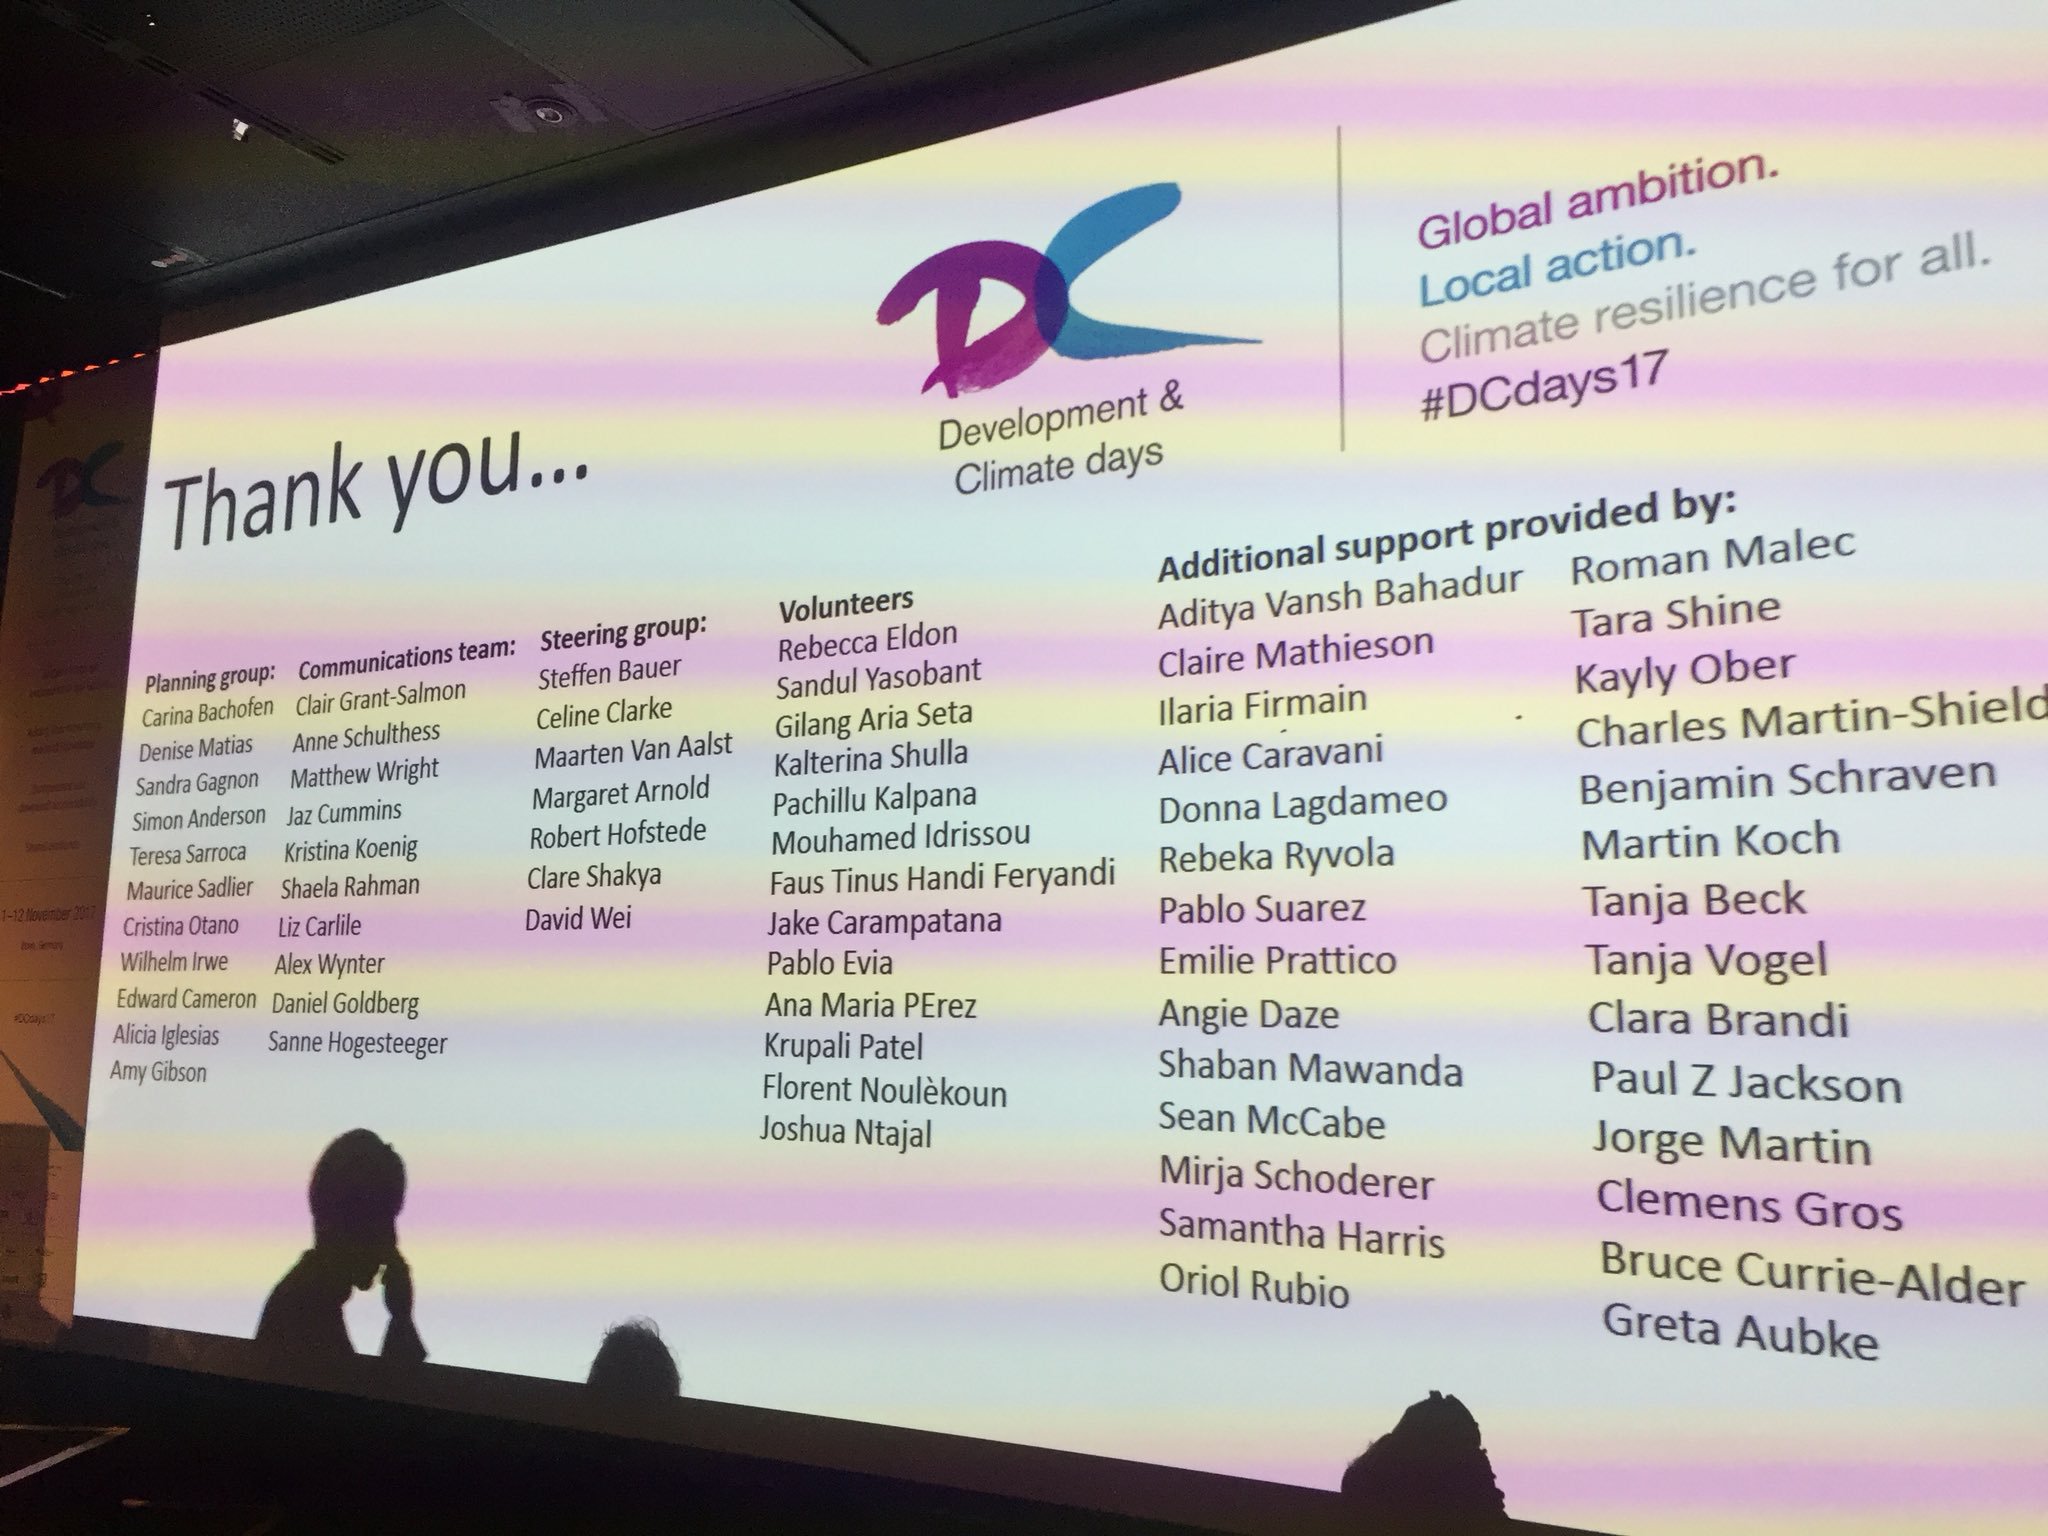 And that’s a wrap! Thanks to everyone who prepared the programme, attended & participated in #DCDays17! #COP23 continues. https://t.co/3697LYzvsg